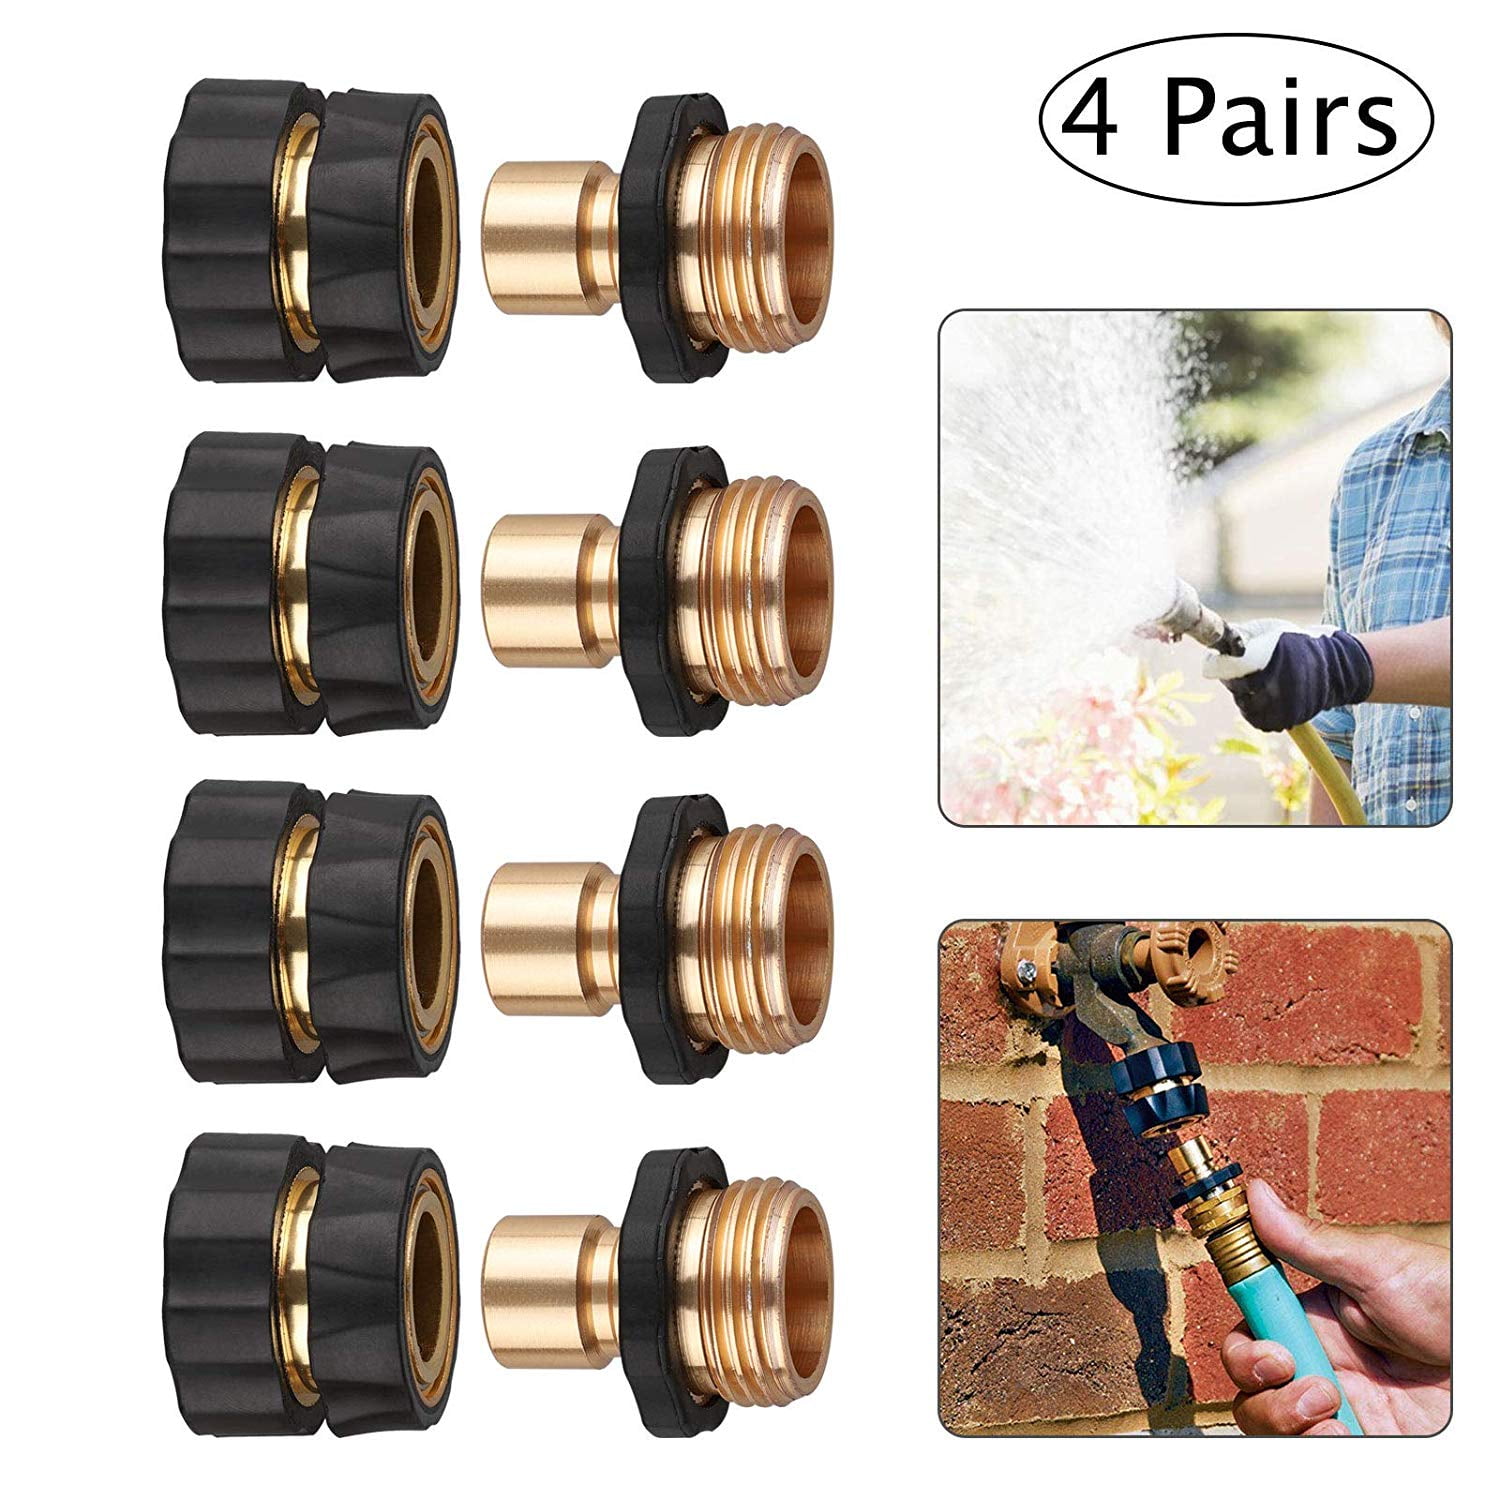 Garden Pipe Quick Fit Adapter Water Hose Tap Connector Fitting Switch Nozzle 